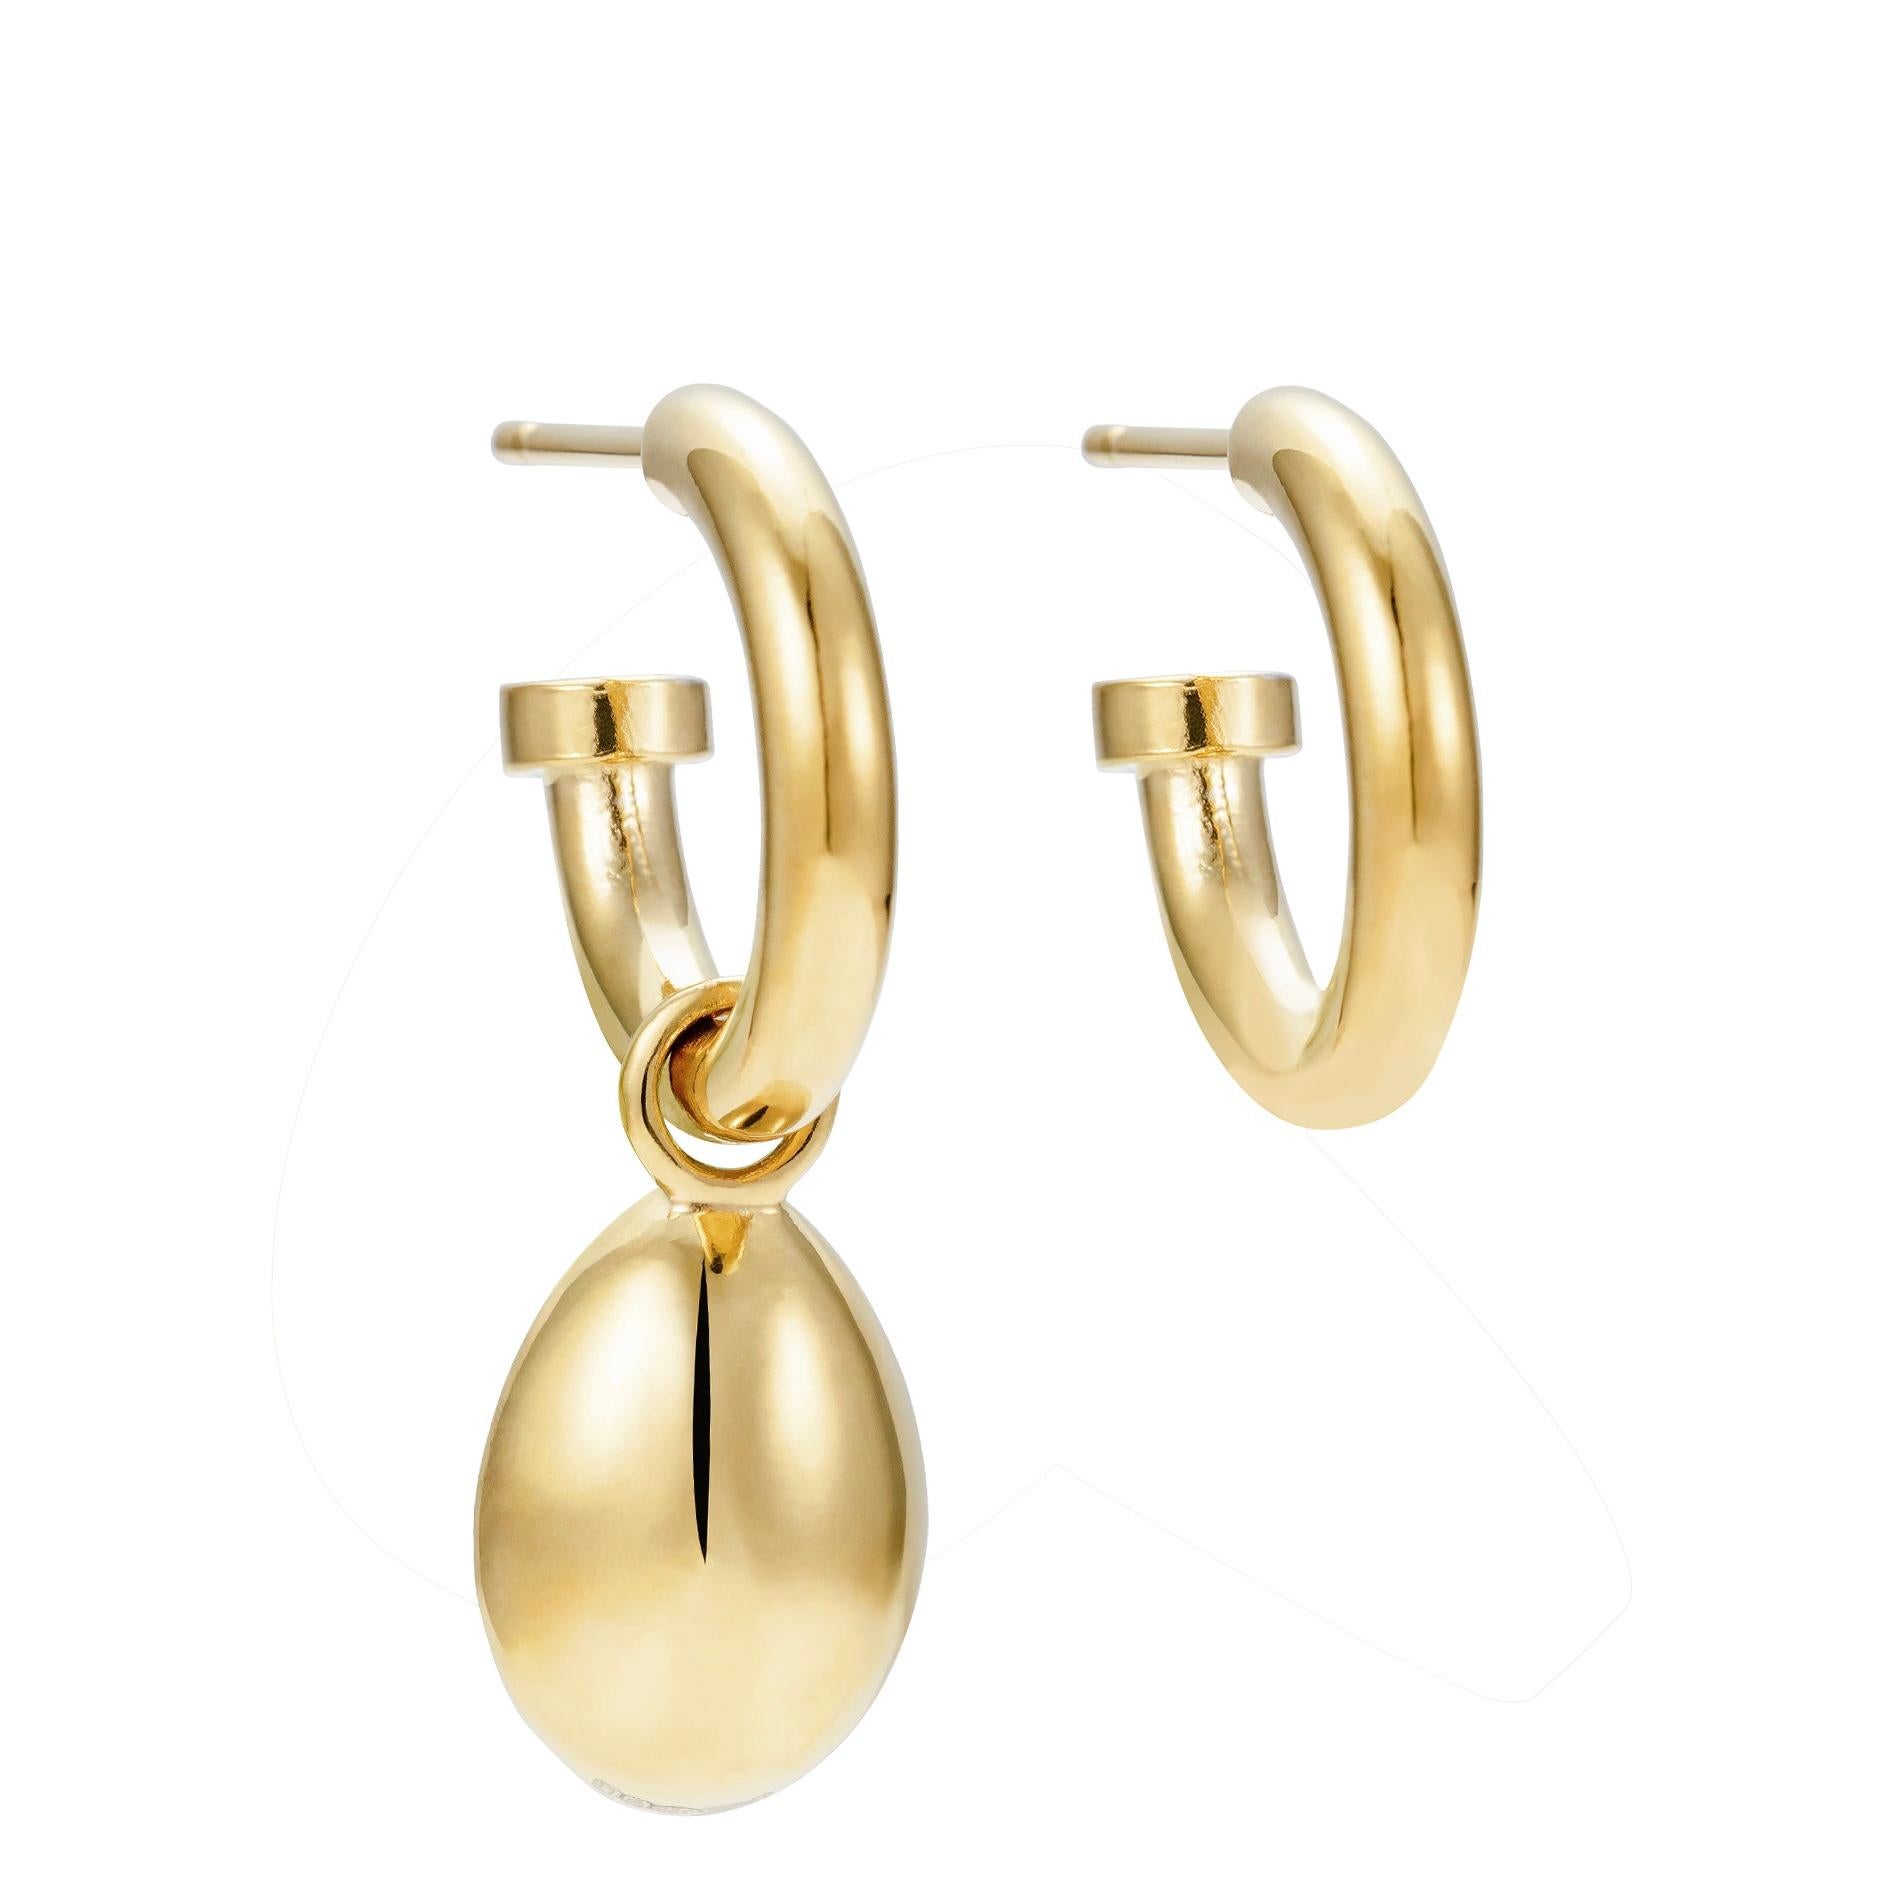 Victoria Strigini (b. 1991) 

A striking pair of contemporary 18k yellow gold hoop earrings, with a single charm featuring an ancient Roman intaglio from the 1st - 2nd century AD, in jasper. Two fish — the Pisces symbol — are gracefully incised in